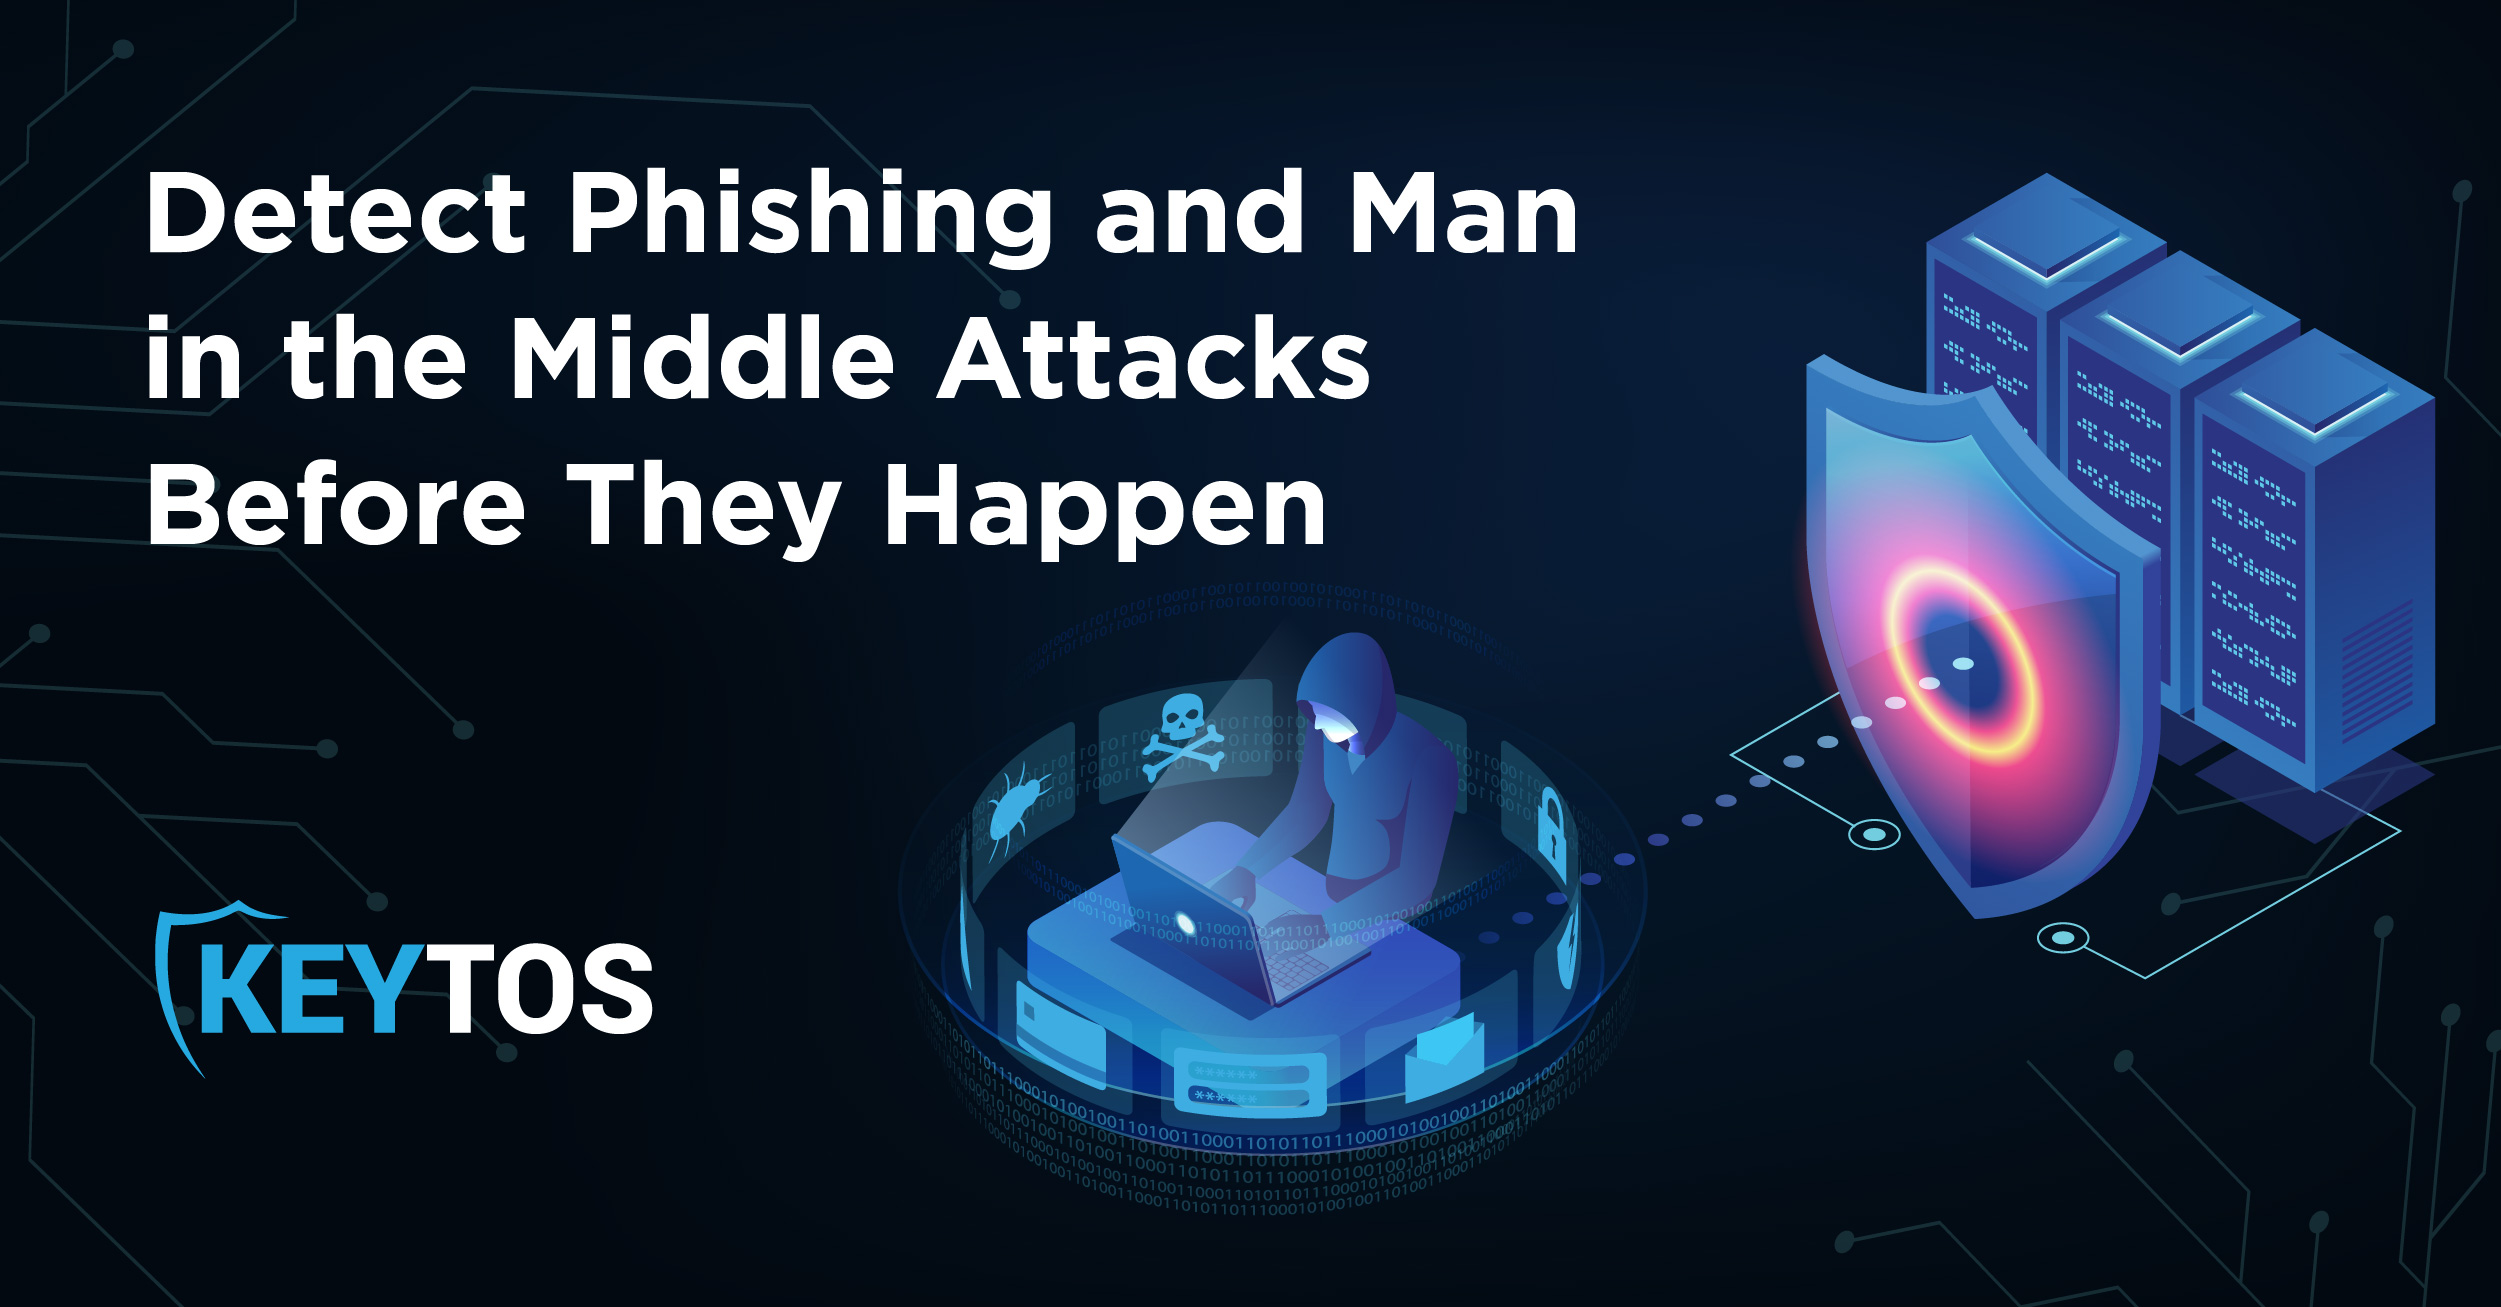 Detect Phishing and Man in the Middle Attacks Before They Happen